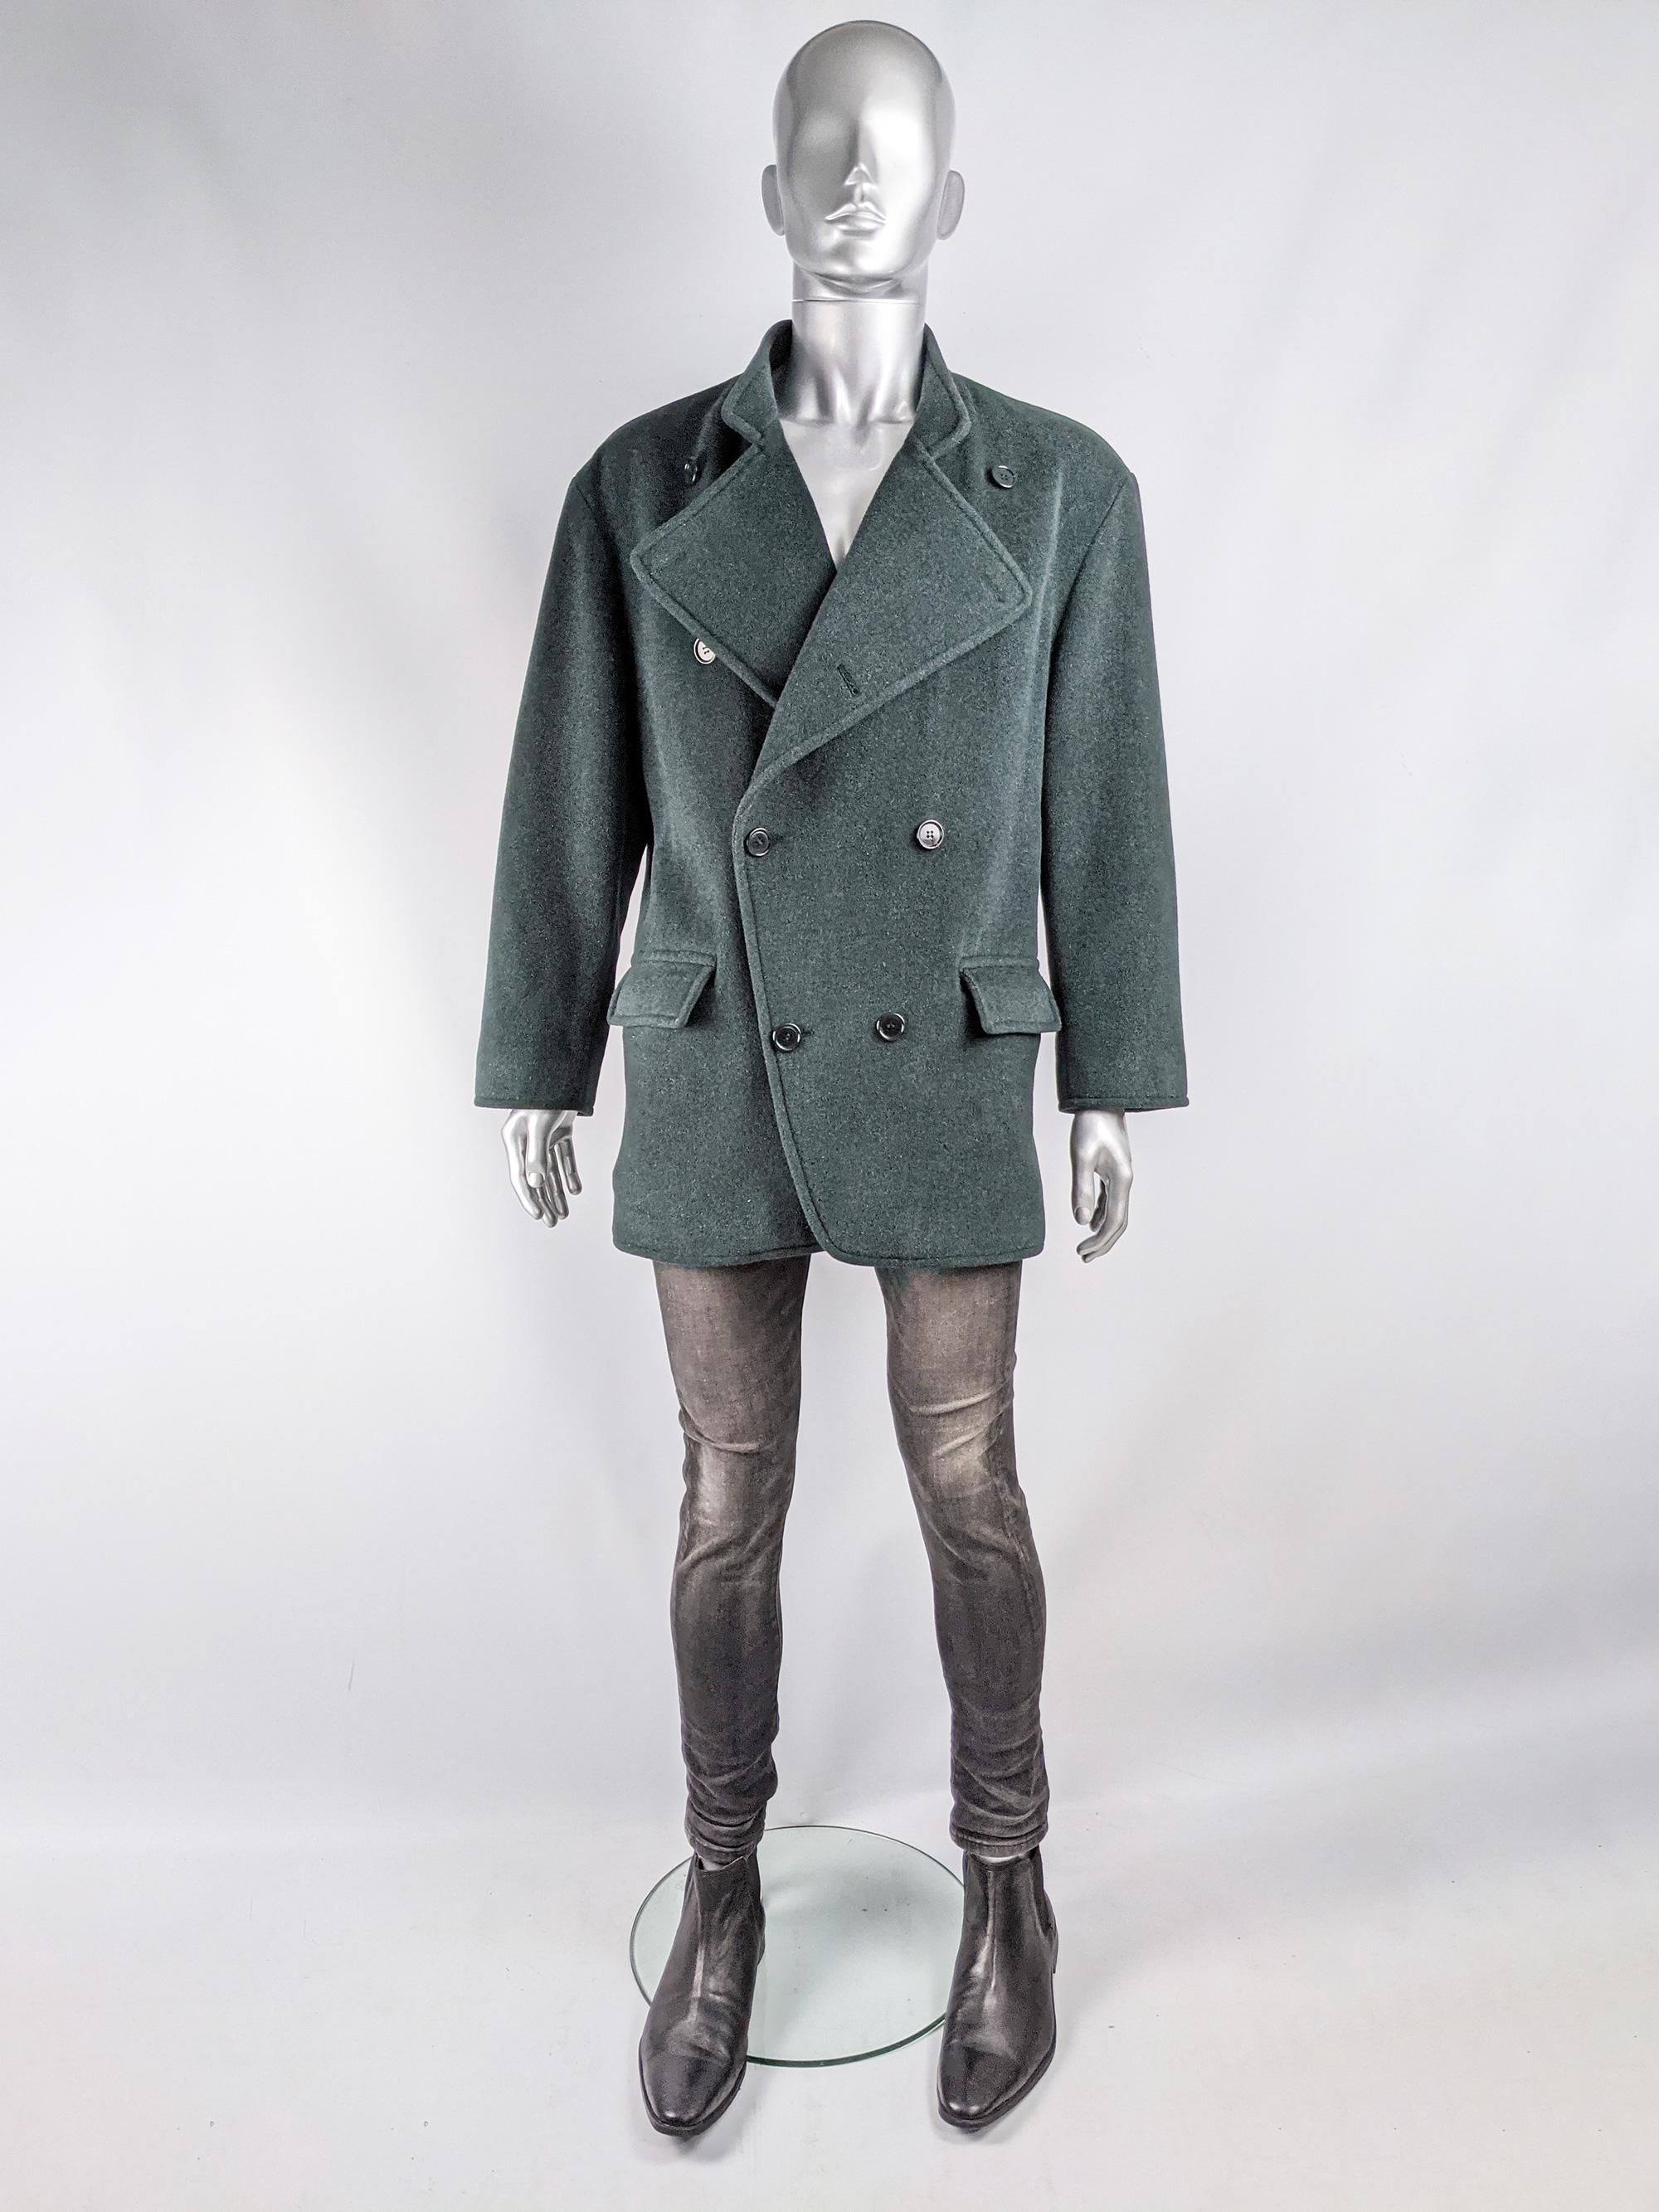 An amazing and rare vintage mens Valentino Couture mens jacket from the 80s. Made in Italy In a luxurious forest / bluish green wool fabric with a strtiped cotton lining, double breasted buttons creating a peacoat inspired look and an unusual stand